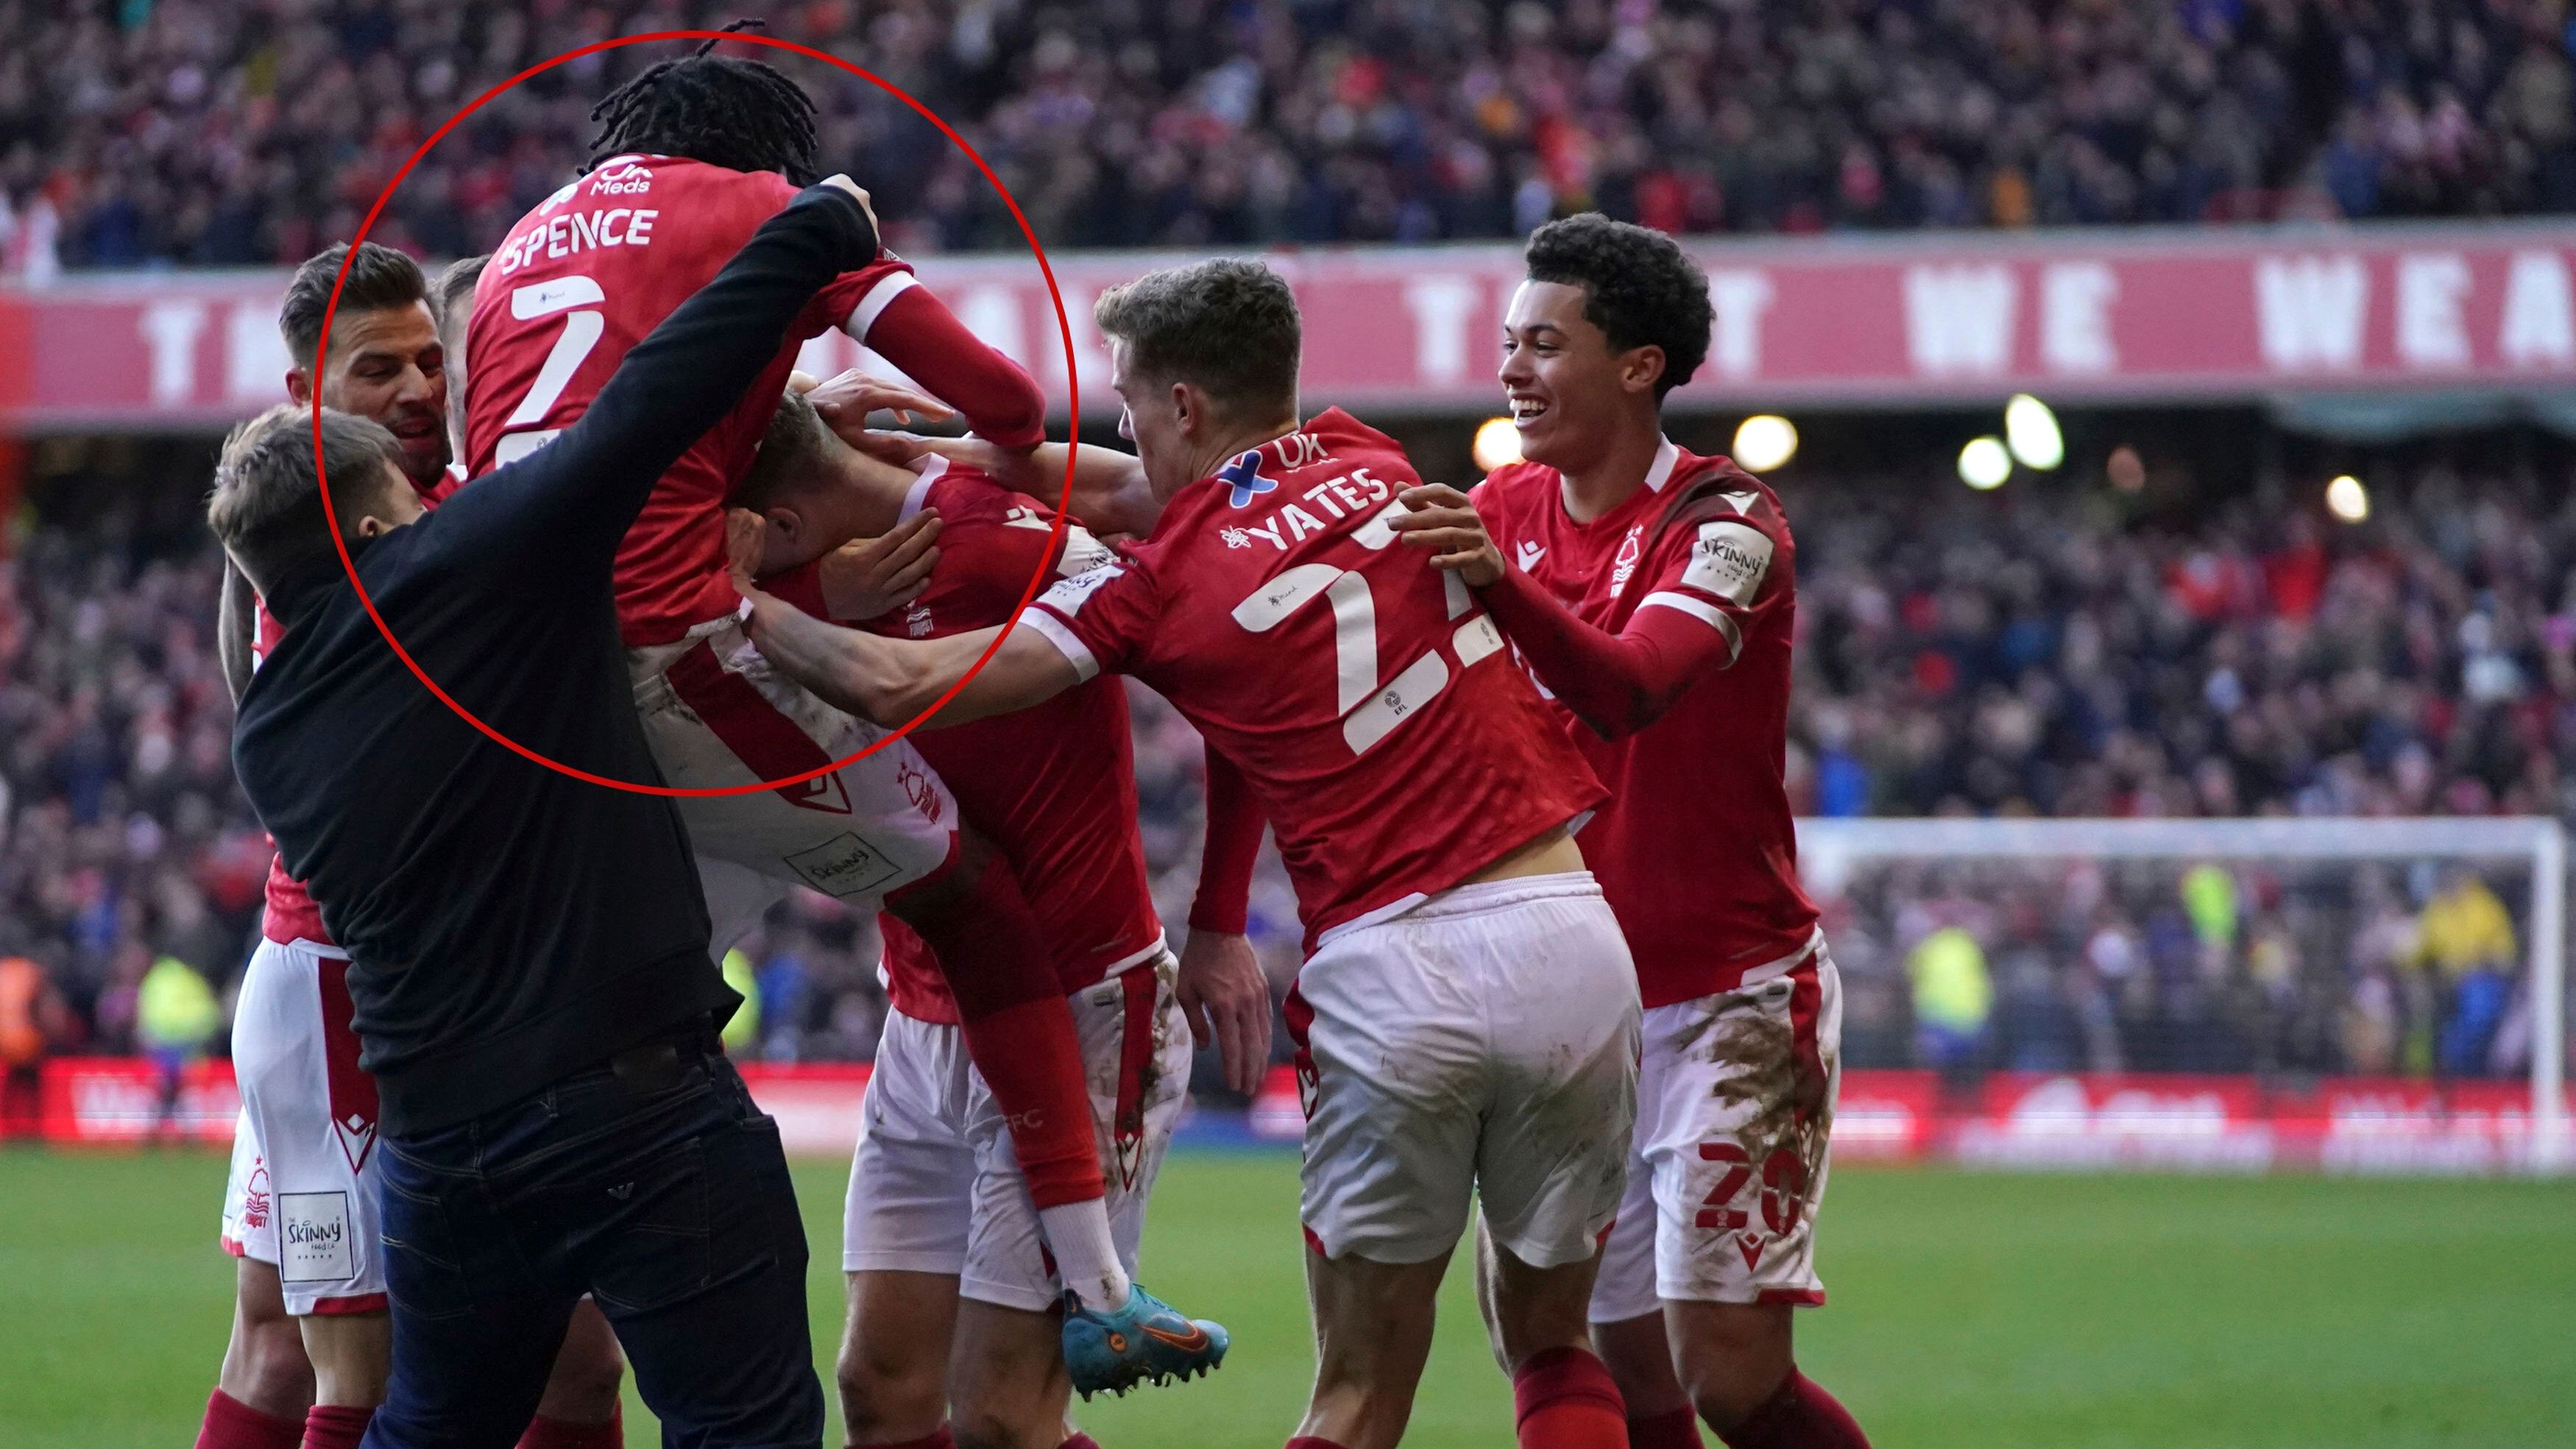 Pitch invader arrested after punching Nottingham Forest player in victory over Leicester